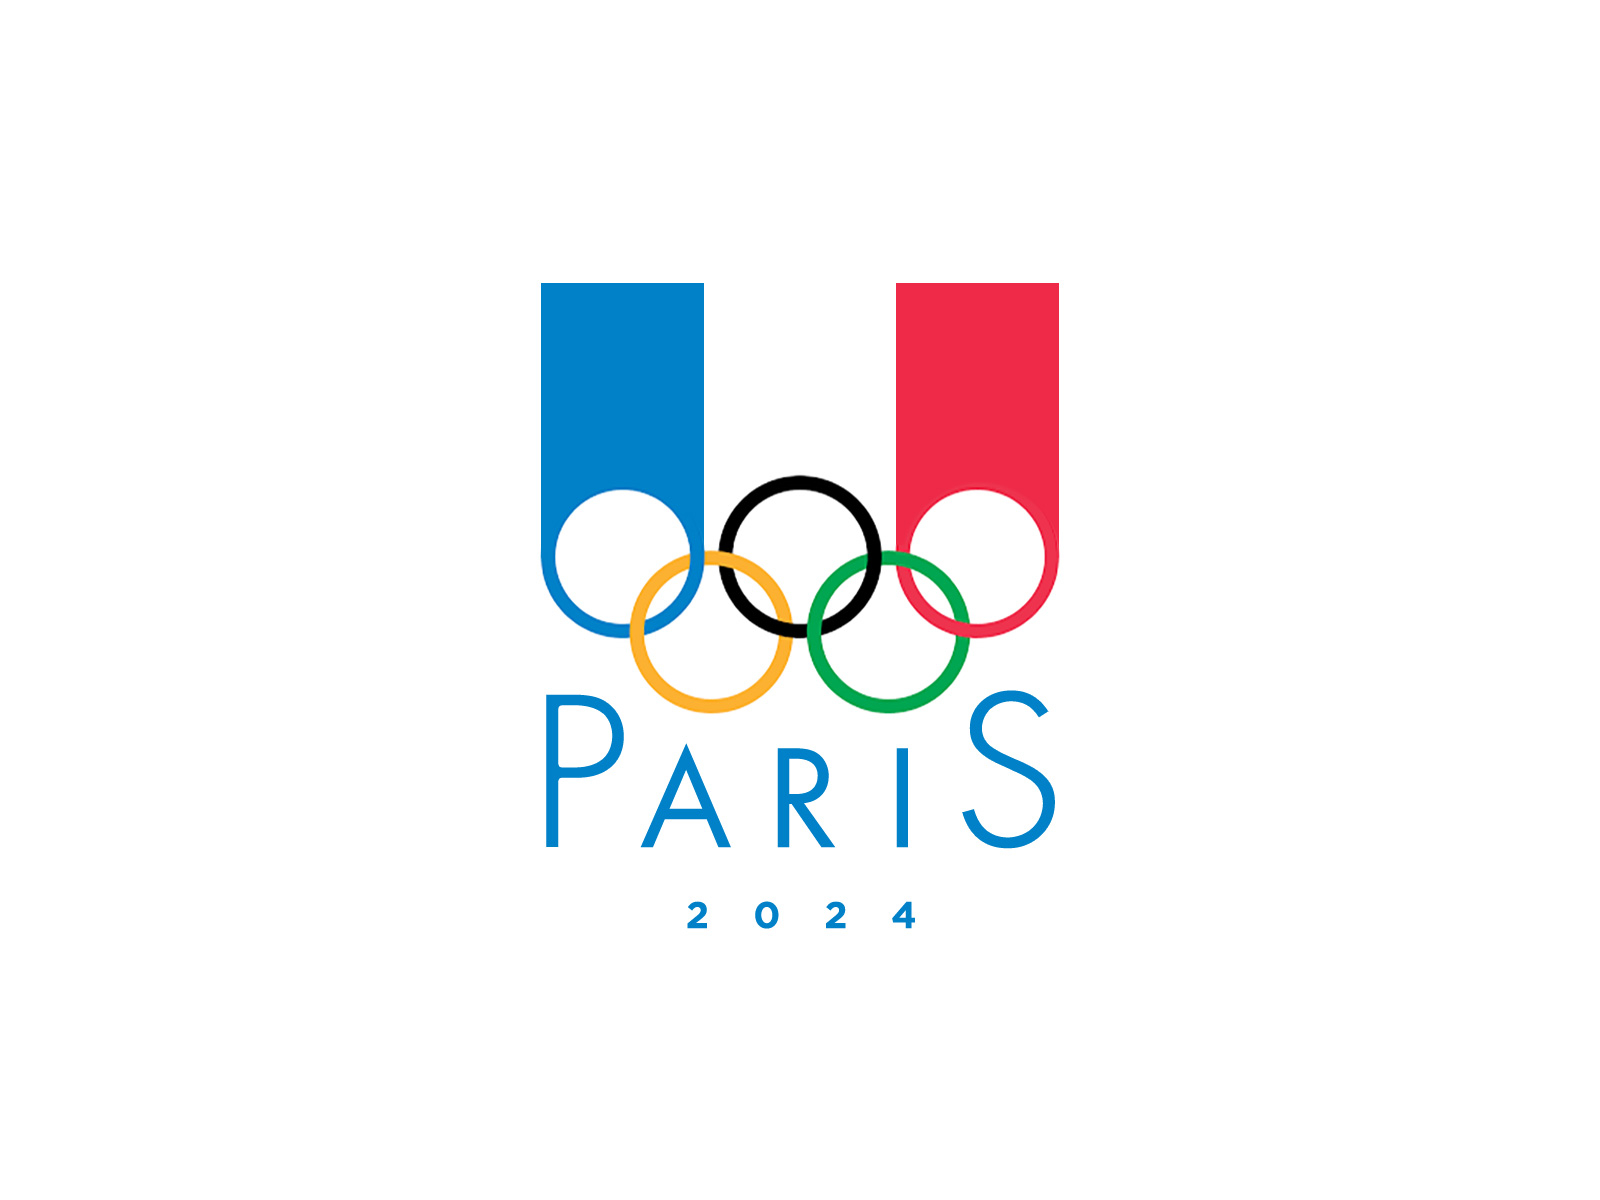 Paris 2024 Olympic Logo CONCEPT by Jorel Dray on Dribbble